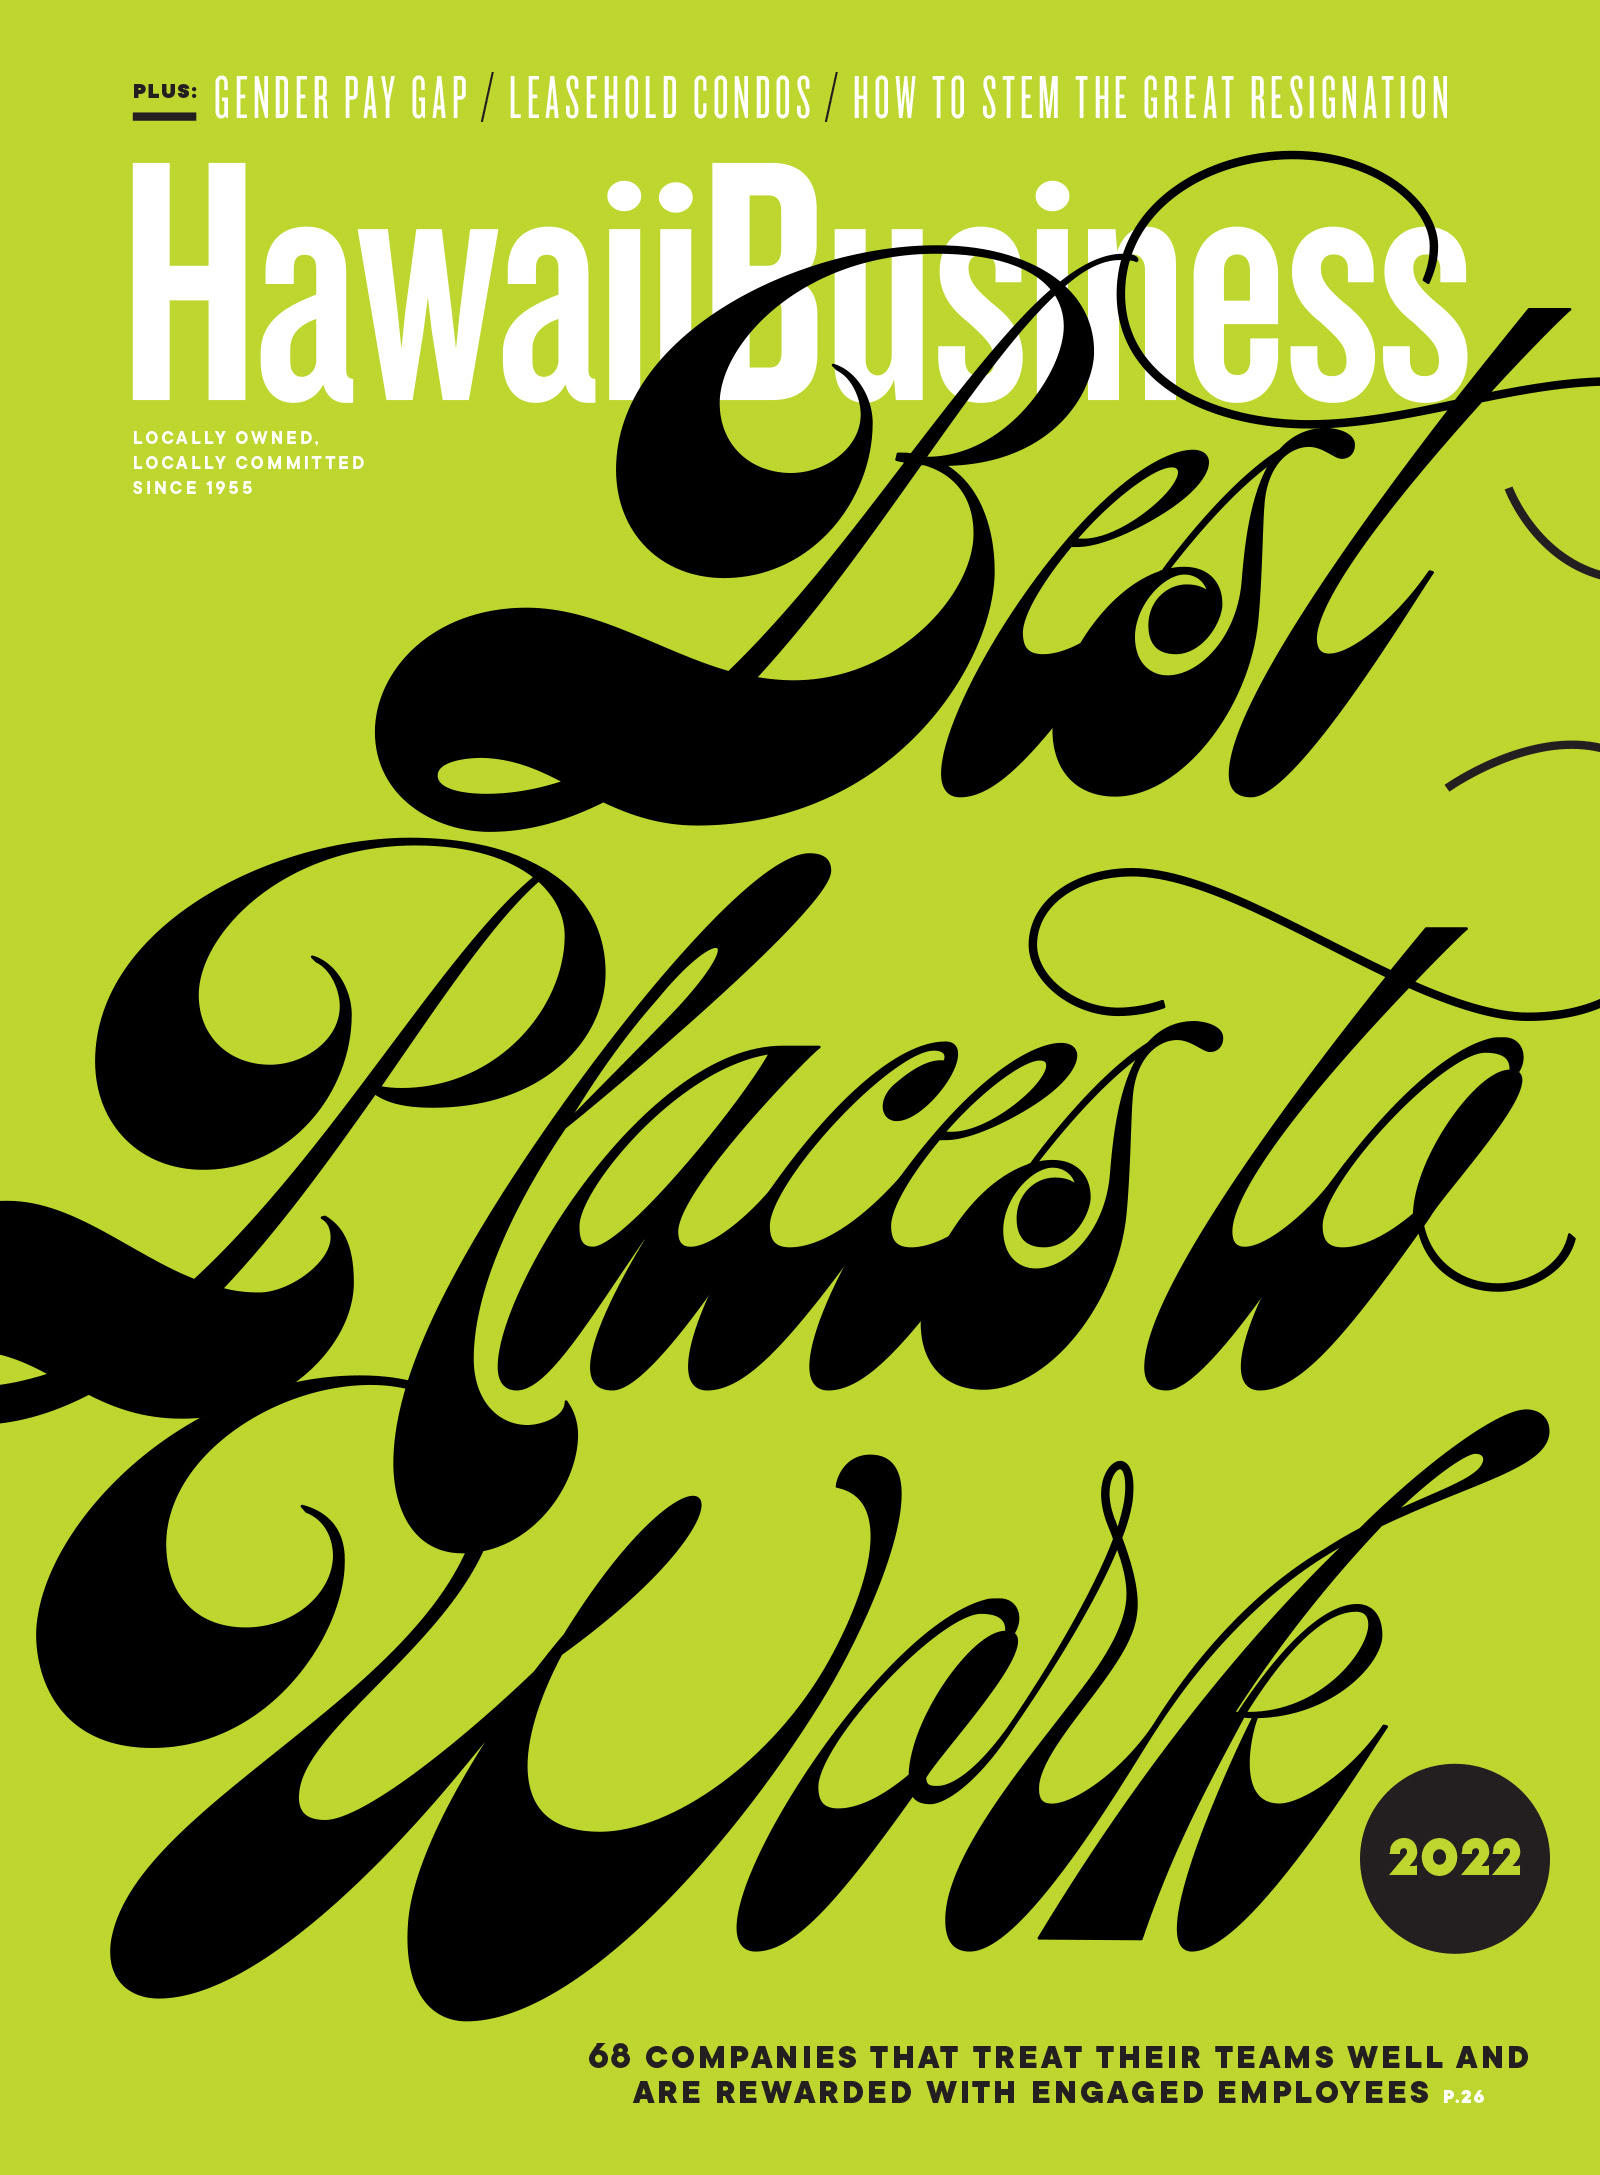 Click here to get your copy of Hawaii Business' April 2022 issue!